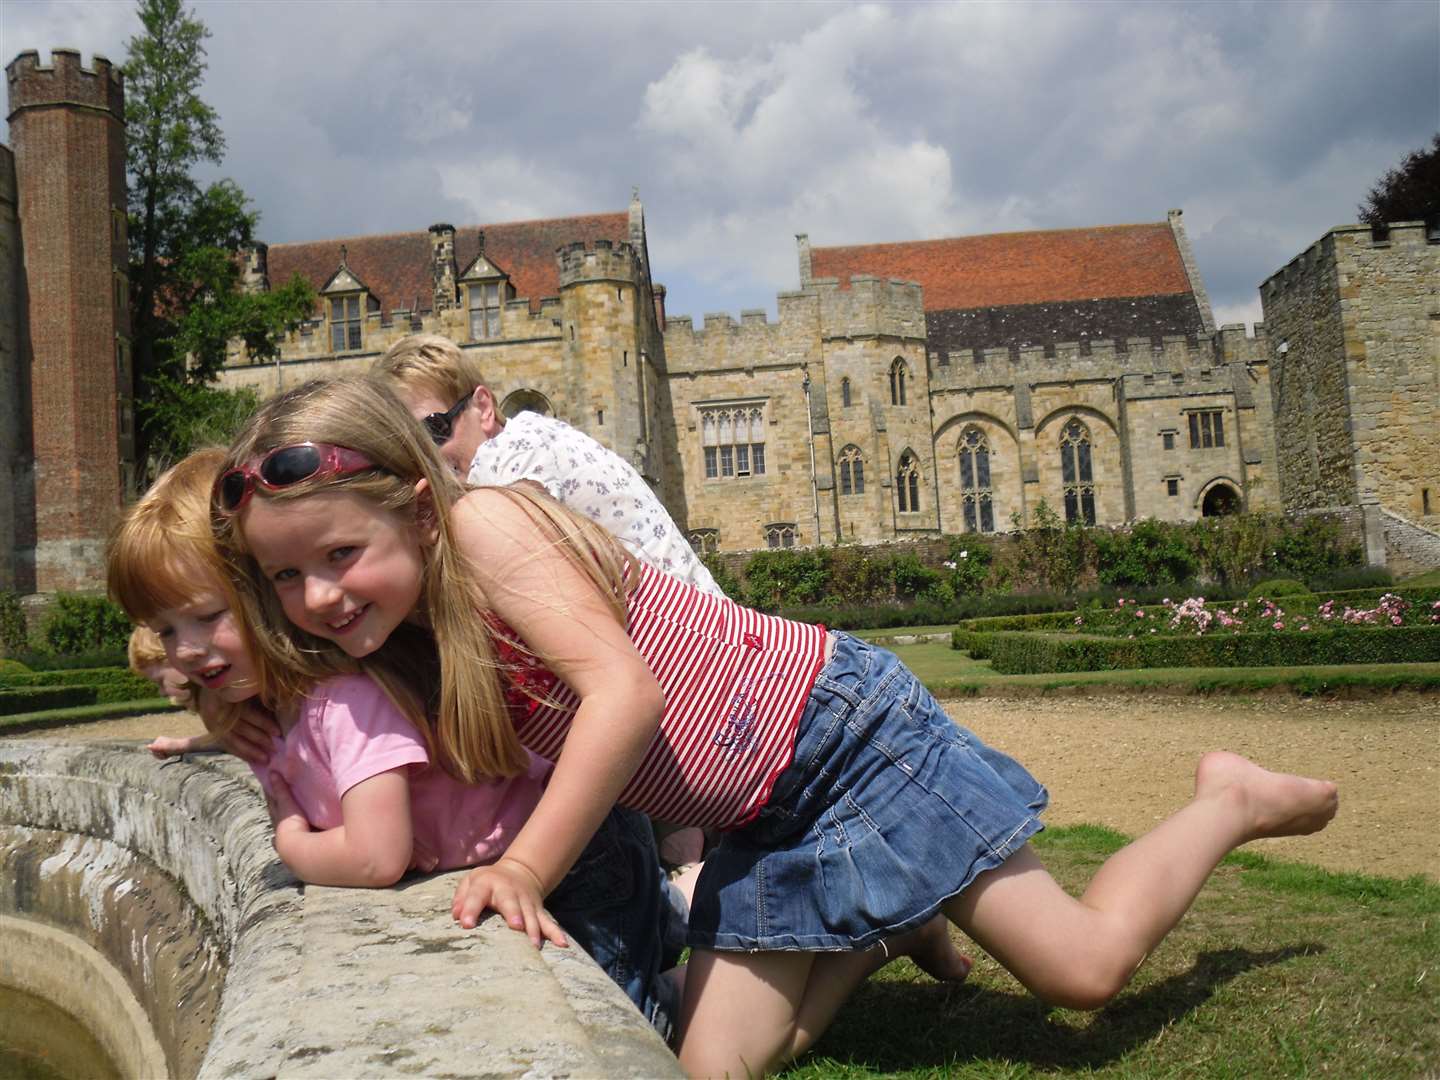 Take the kids along to an entertaining Sunday show at Penshurst Place. Picture: Penshurst Place